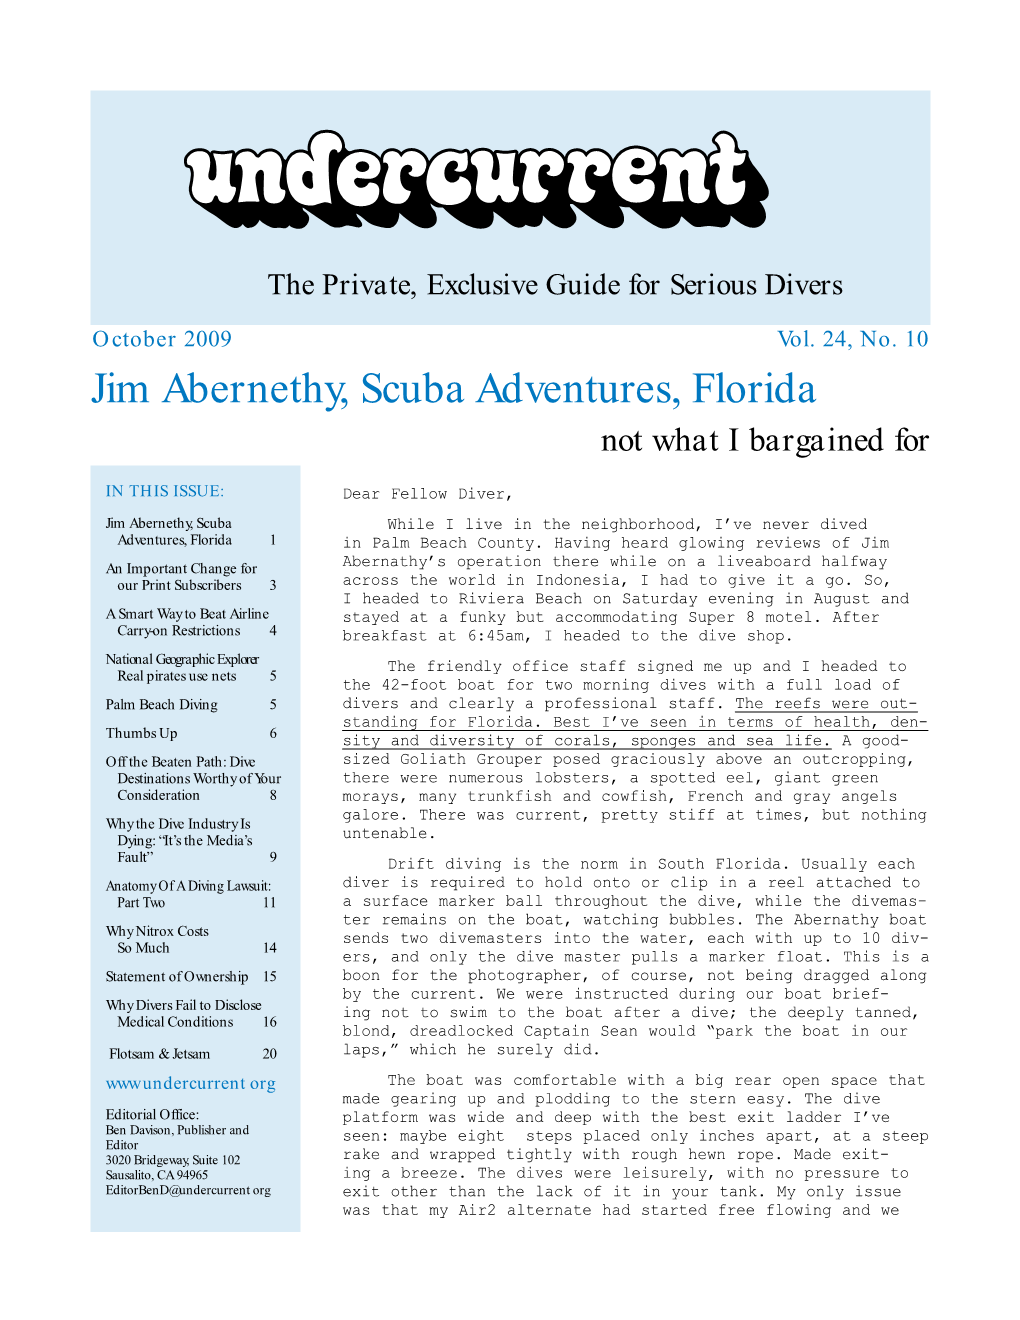 Jim Abernethy, Scuba Adventures, Florida Not What I Bargained For